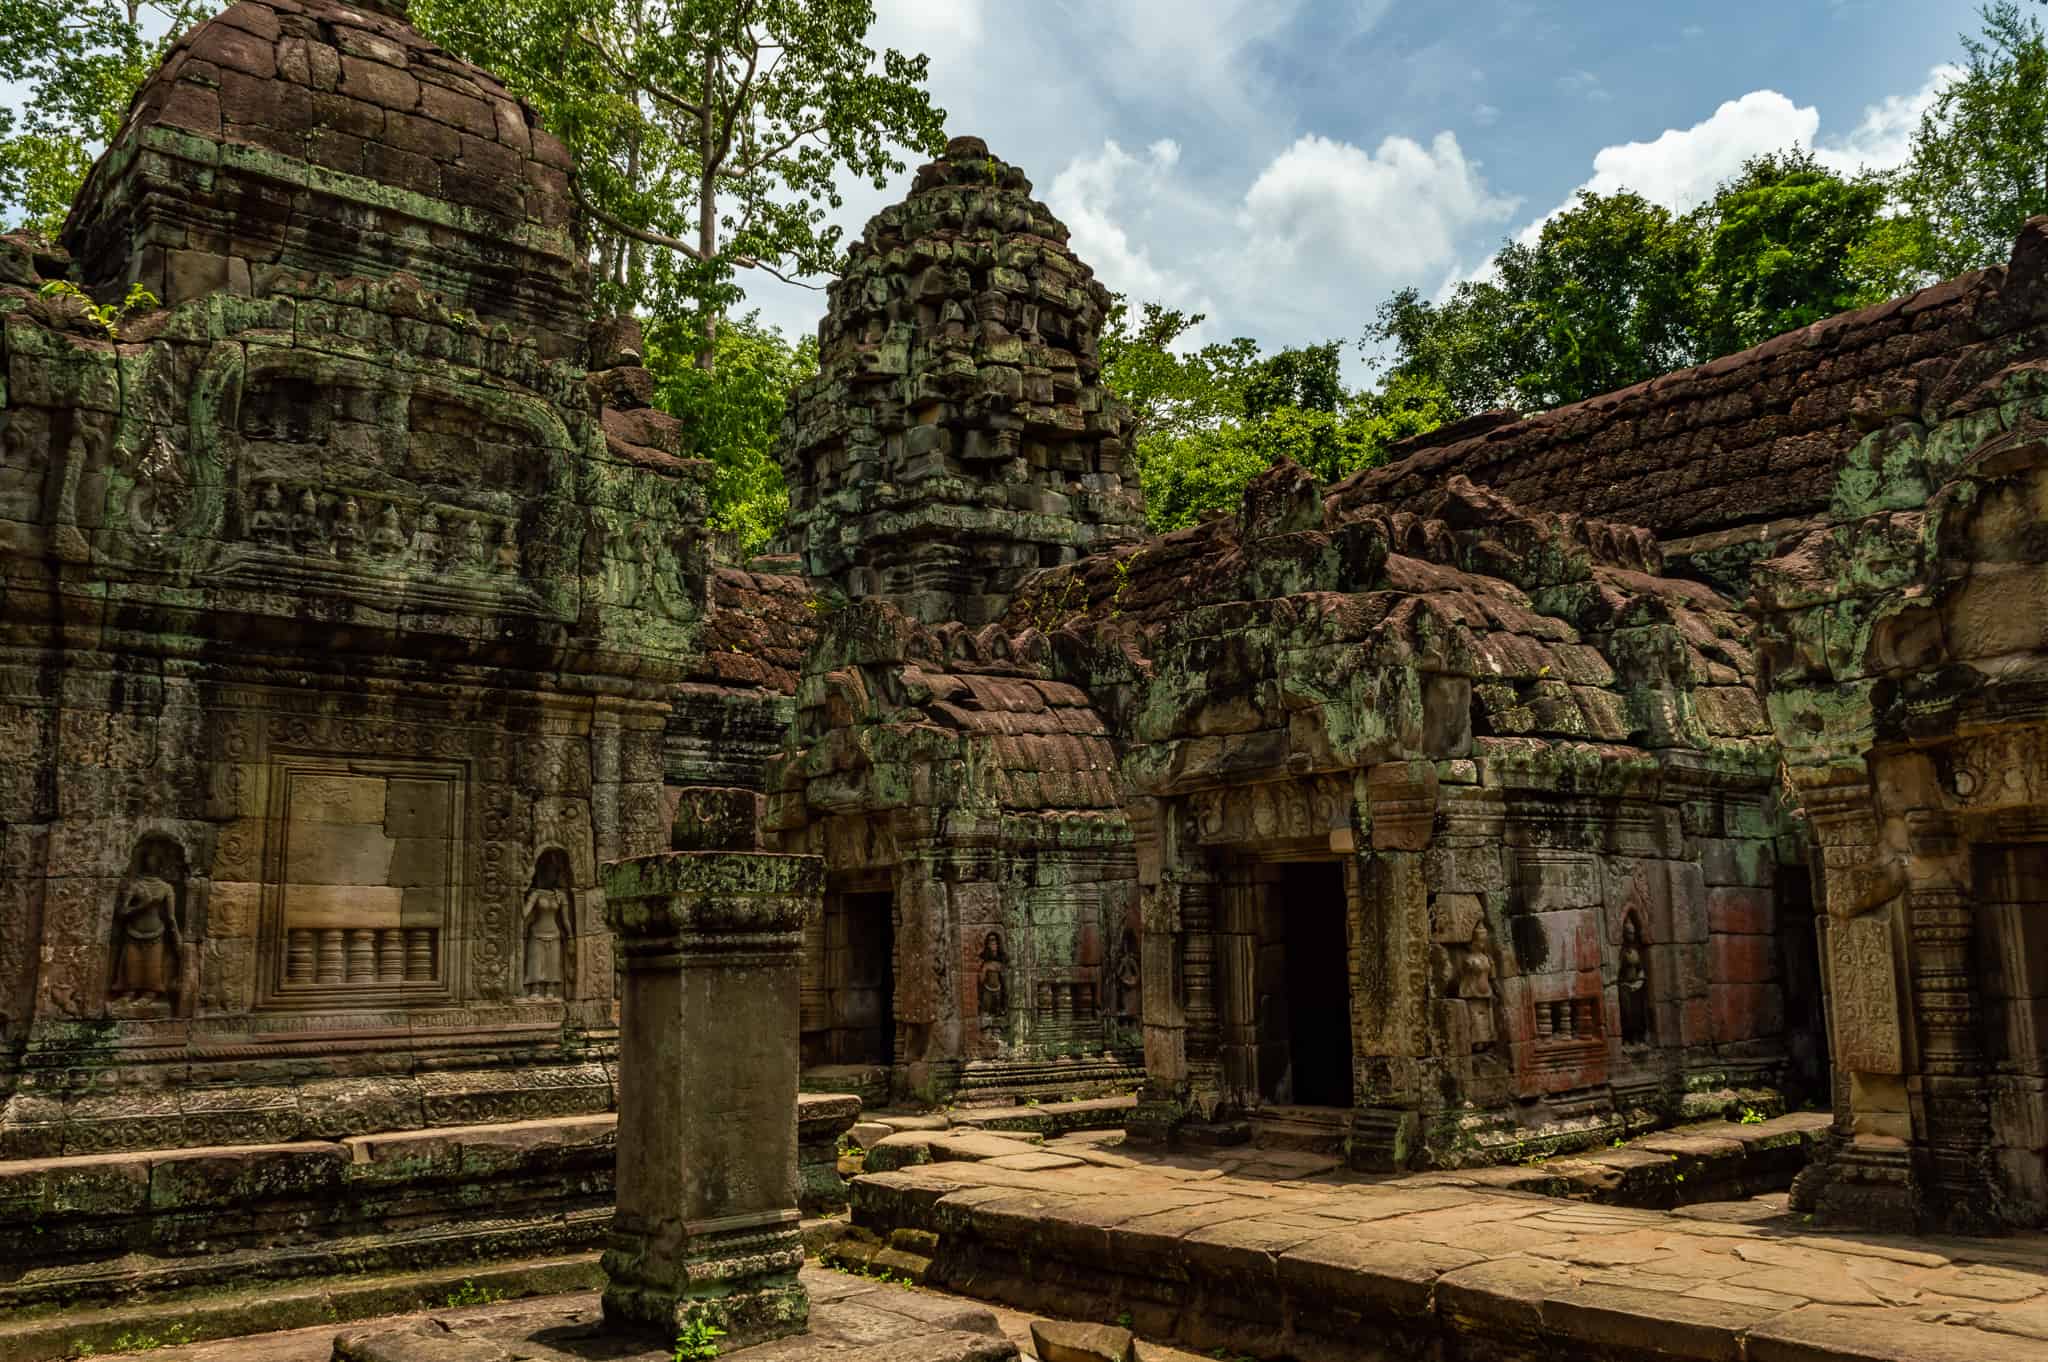 Angkor Wat is full of amazing temples to explore.